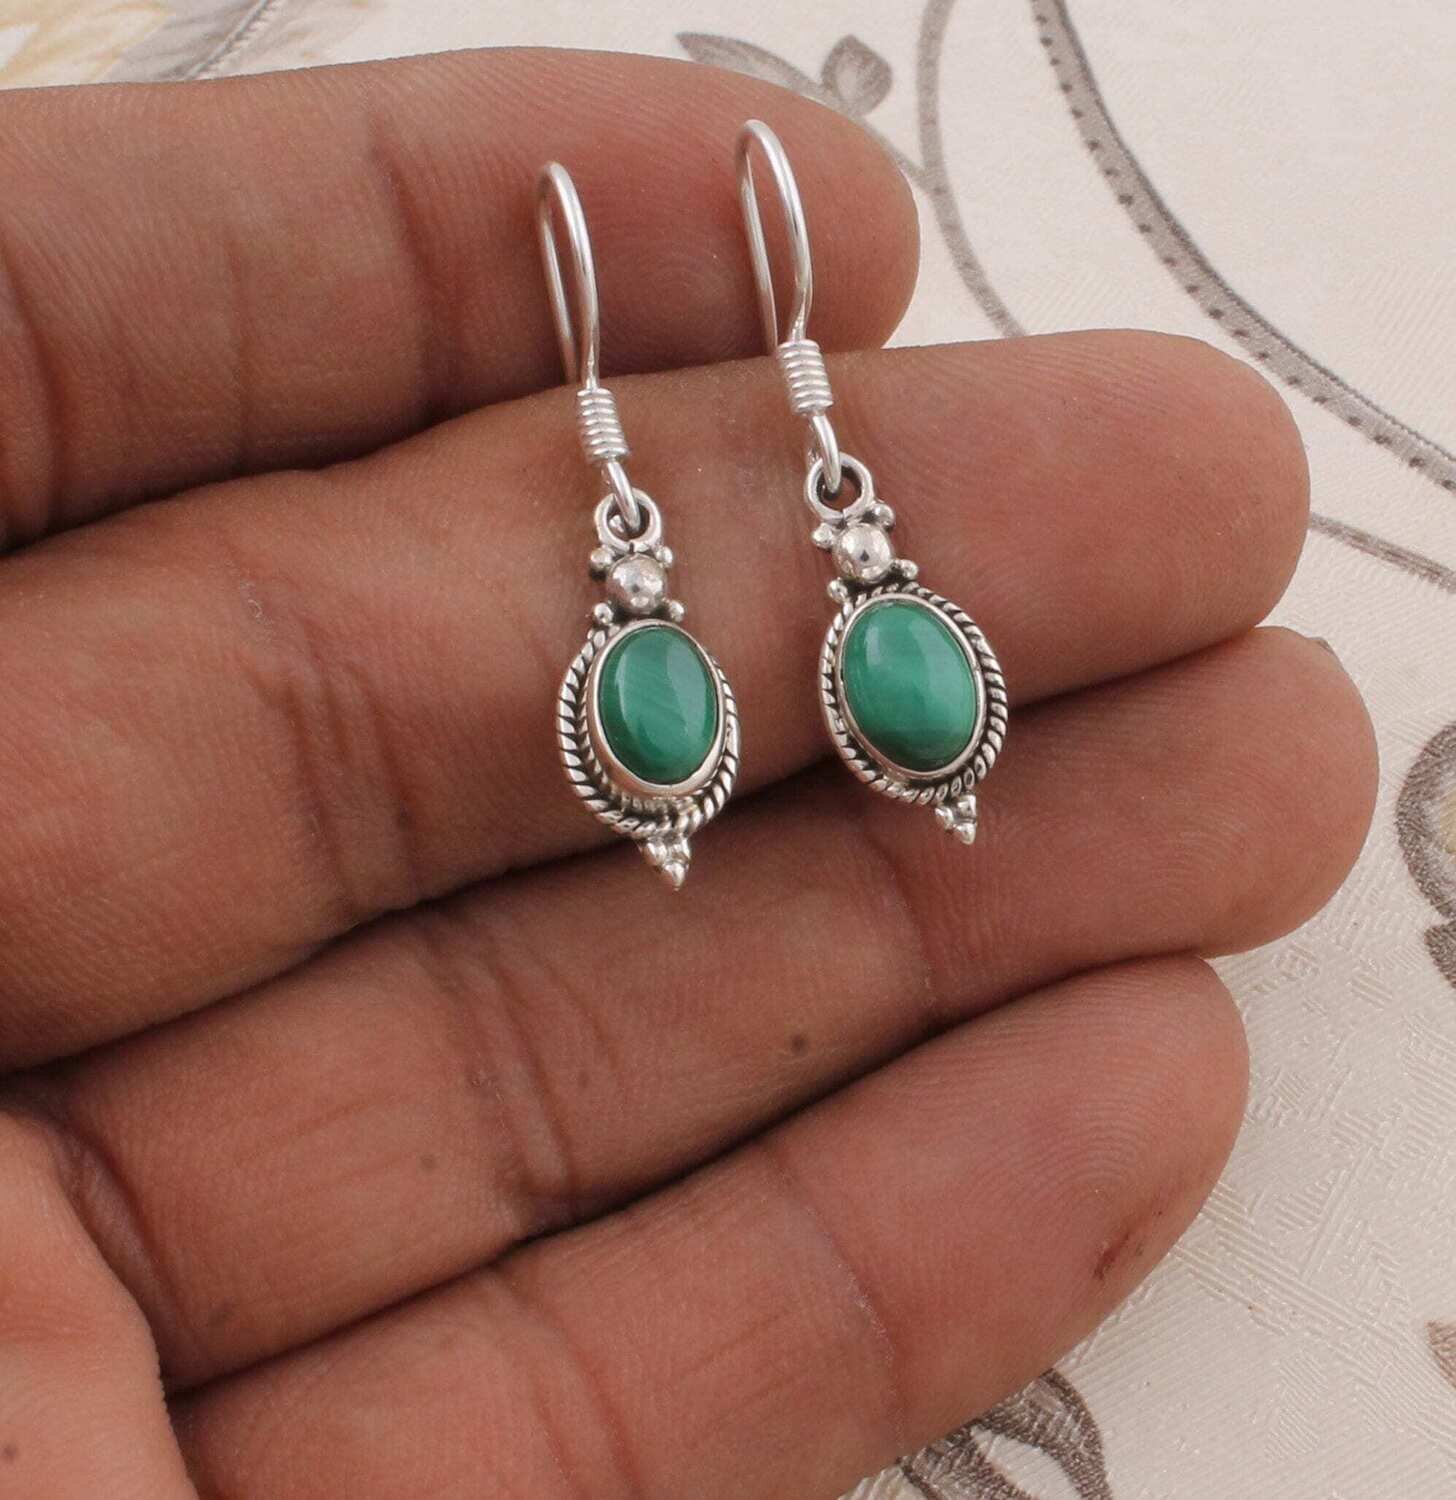 Earring 925 silver Handmade Earring Natural Melachite Top Quality Gemstone Earring Green Colour Stone And Silver Color EarringBirthstone